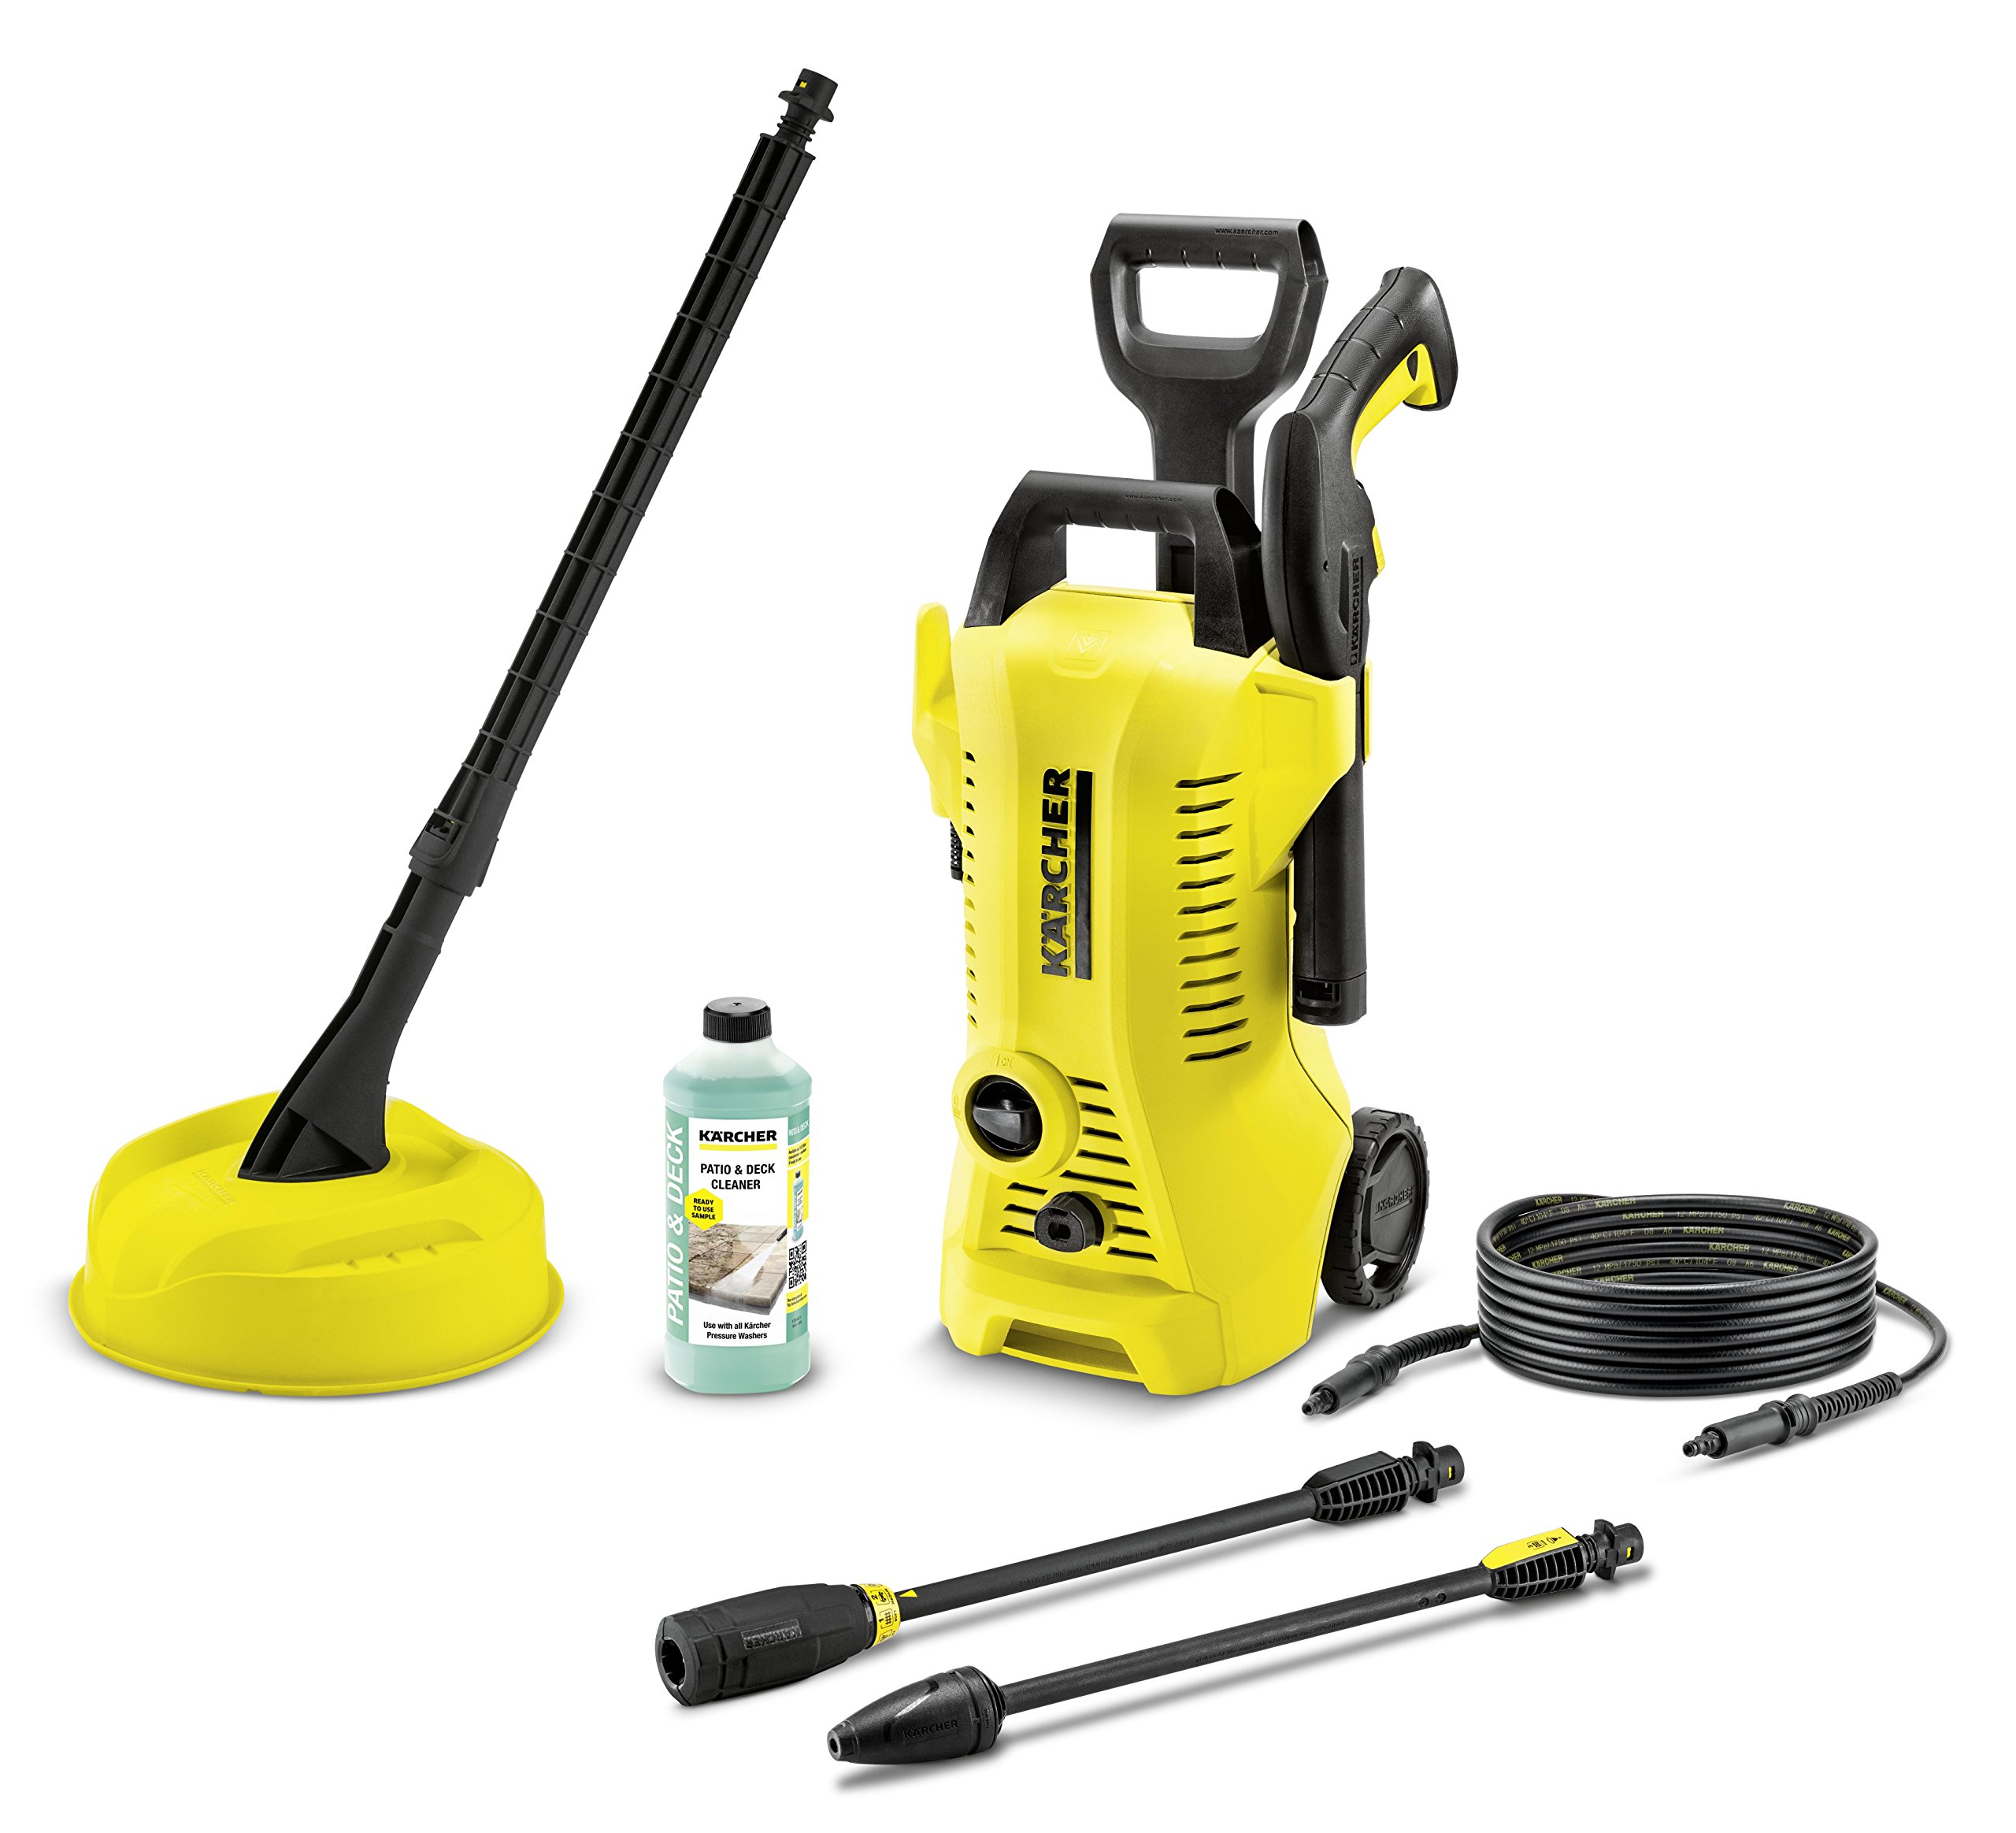 Pressure washer with attachments